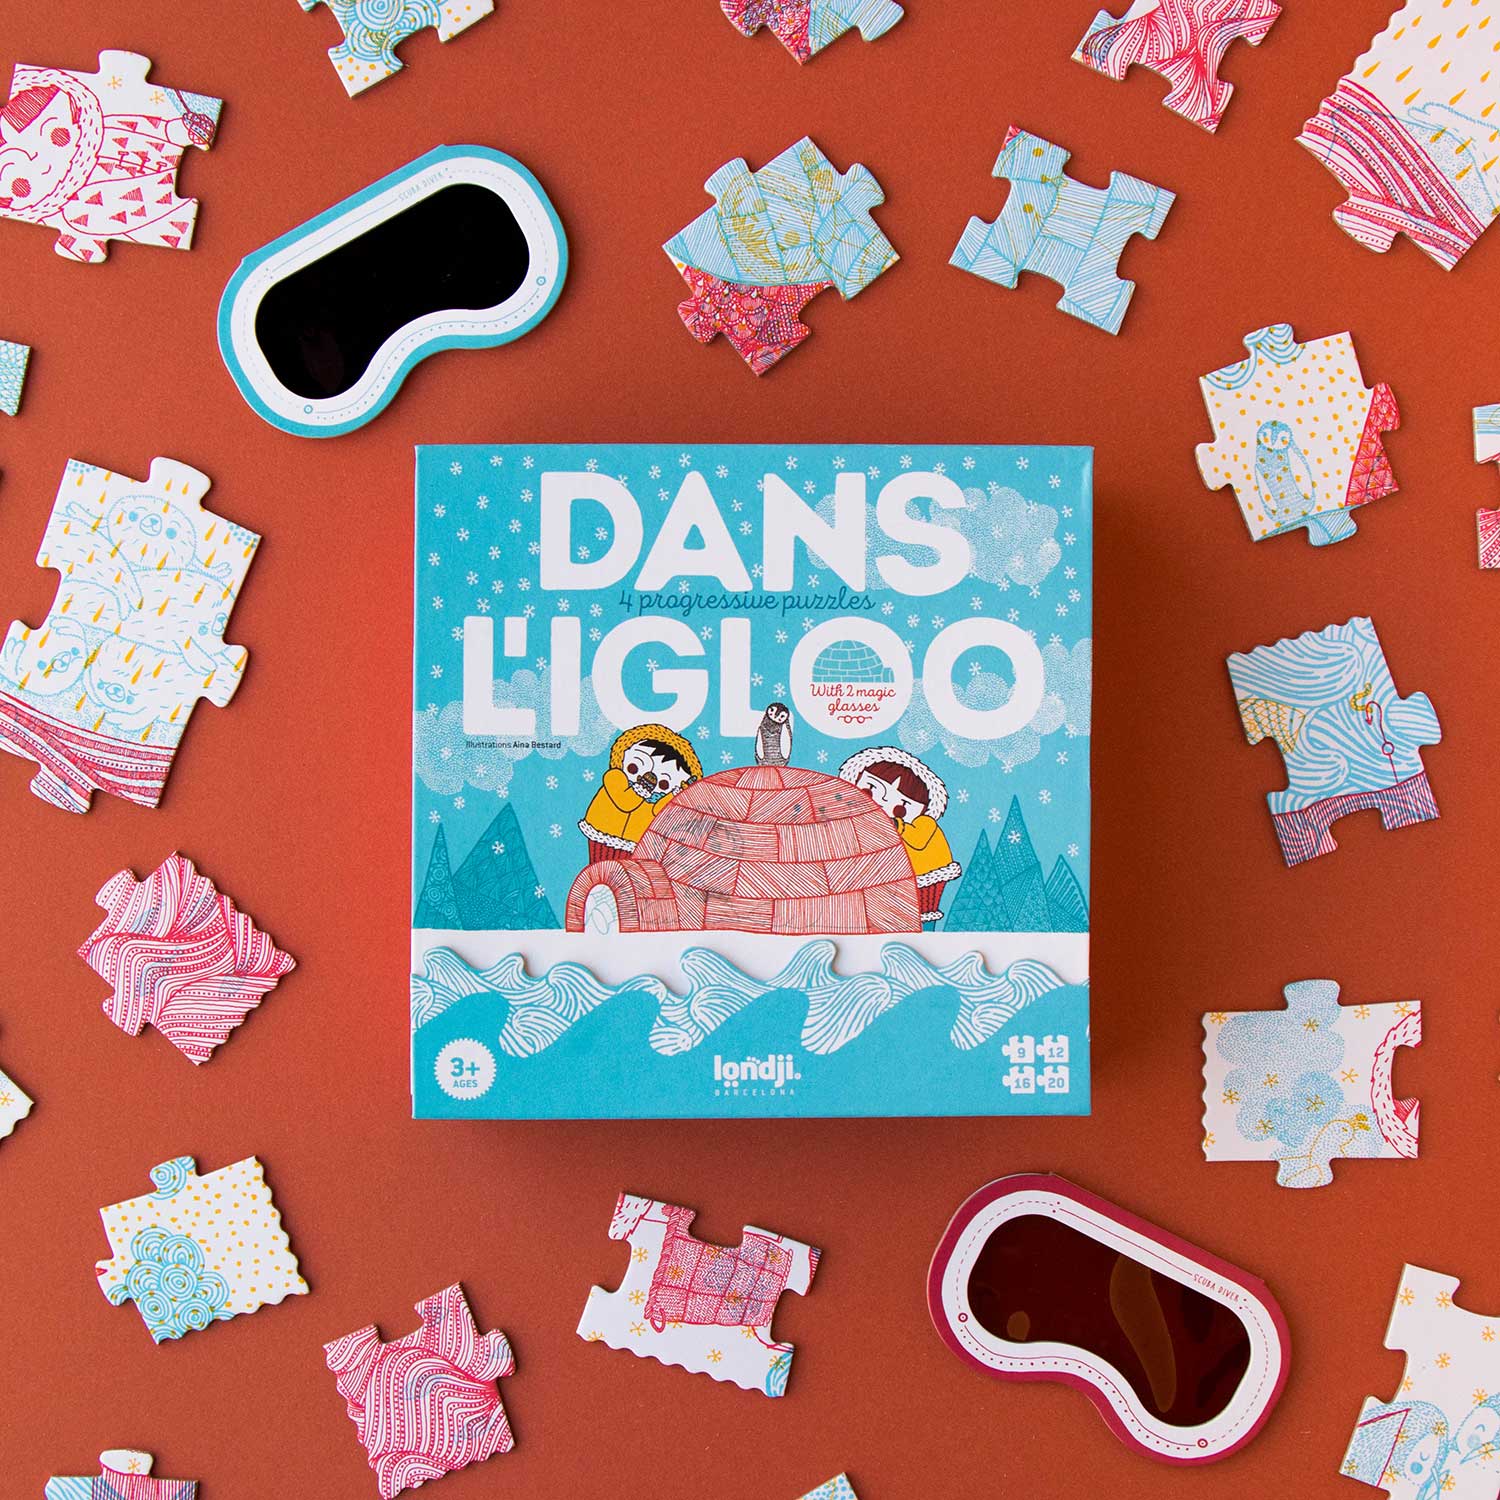 Image shows the front of a square puzzle box named dan's L'igloo, shown from above. Scatters around are puzzle pieces and two 3D viewing screens shaped as goggles. Shown against a red backdrop.